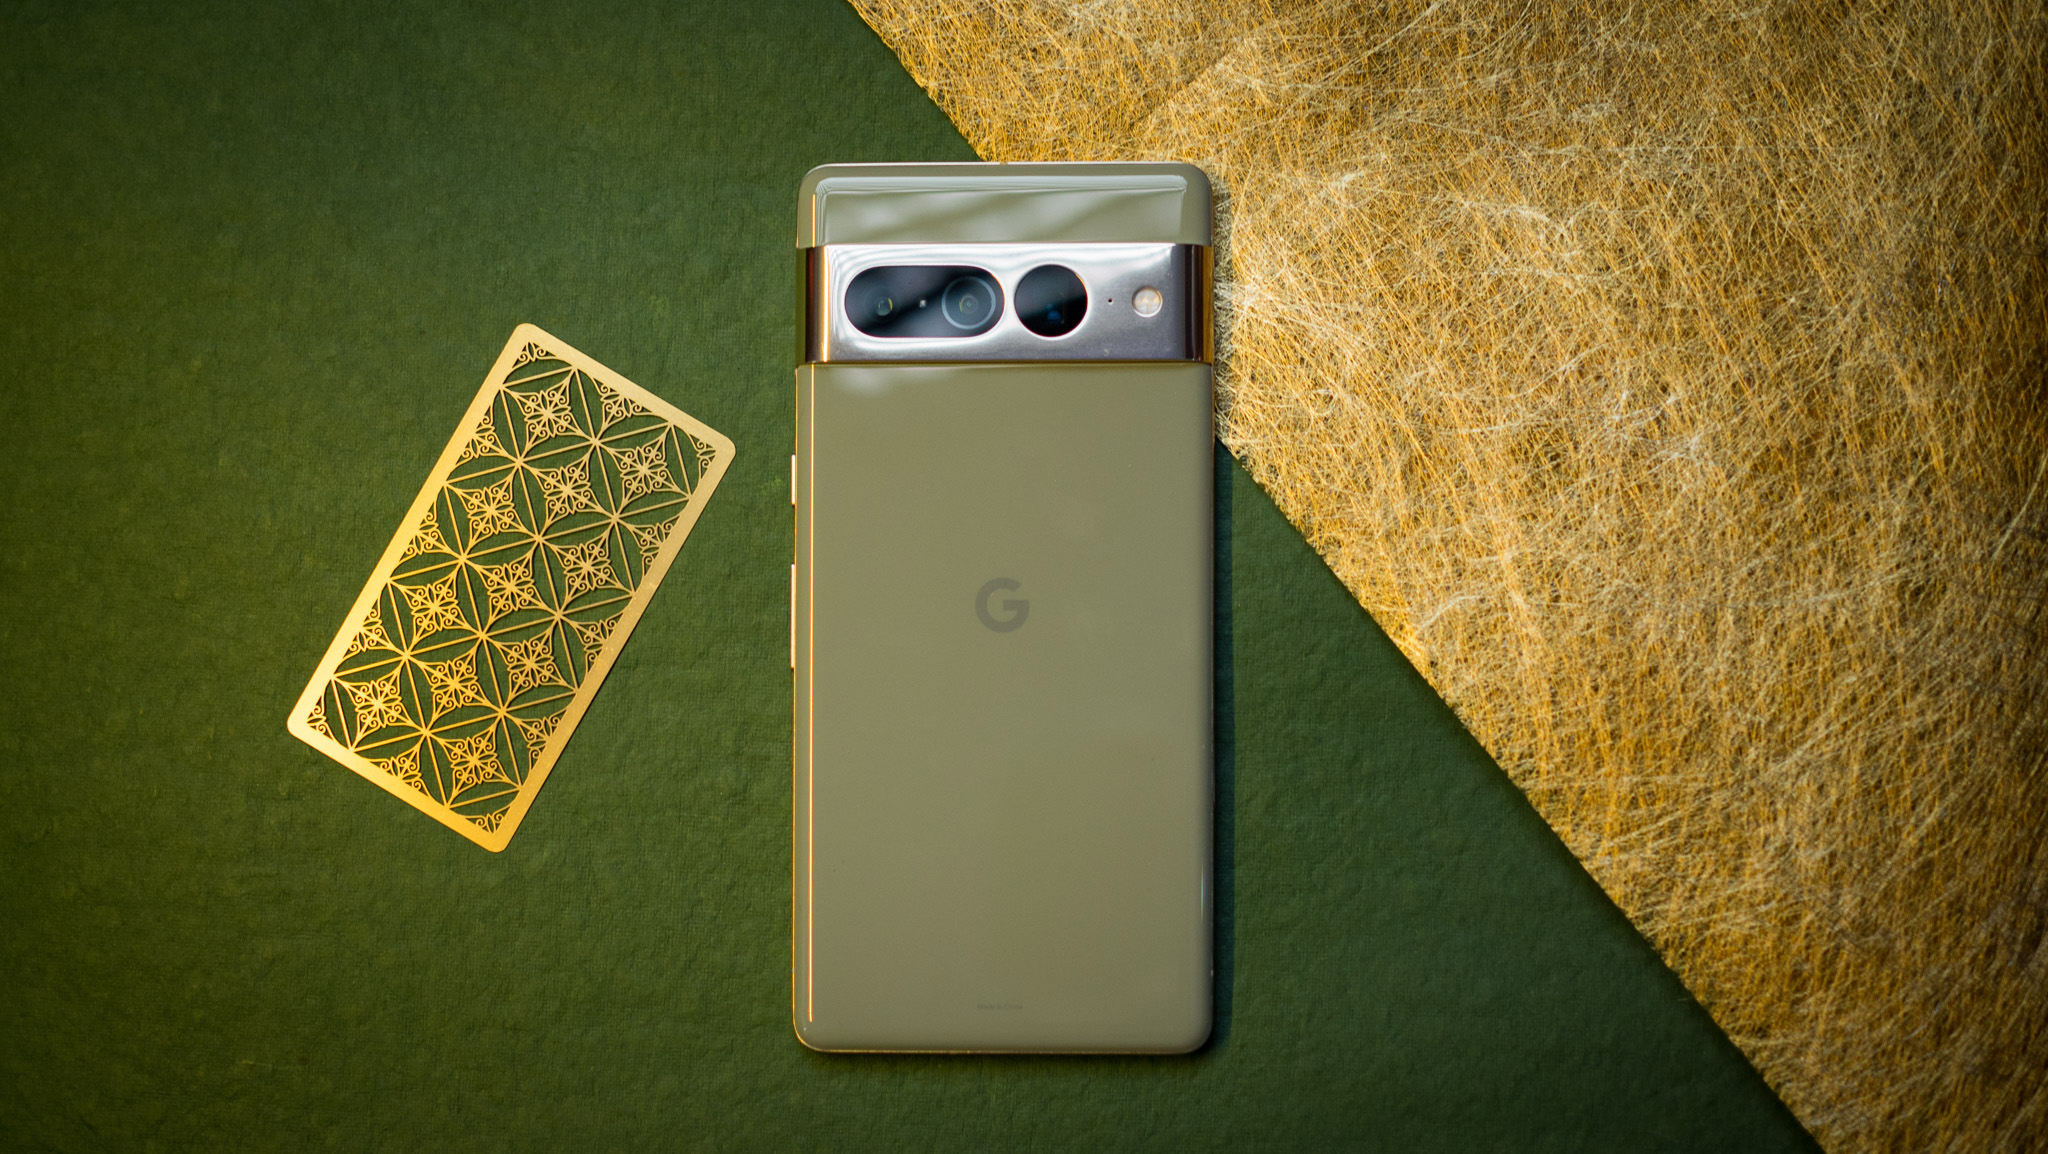 Google Pixel 7 Pro back view straight on angle against green background